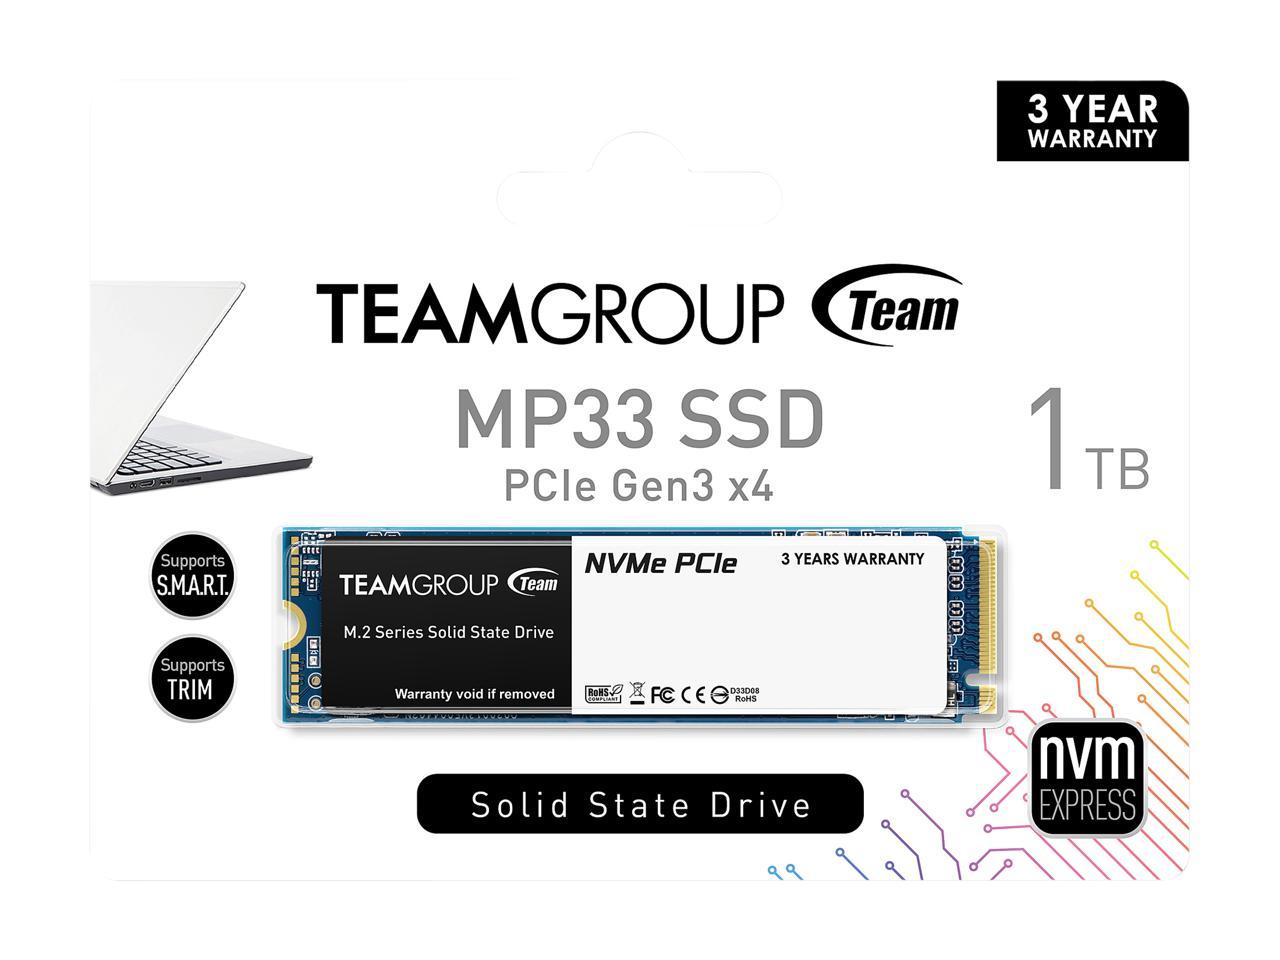 Team Group MP33 M.2 2280 1TB PCIe 3.0 x4 with NVMe 1.3 3D NAND Internal Solid State Drive (SSD) TM8FP6001T0C101